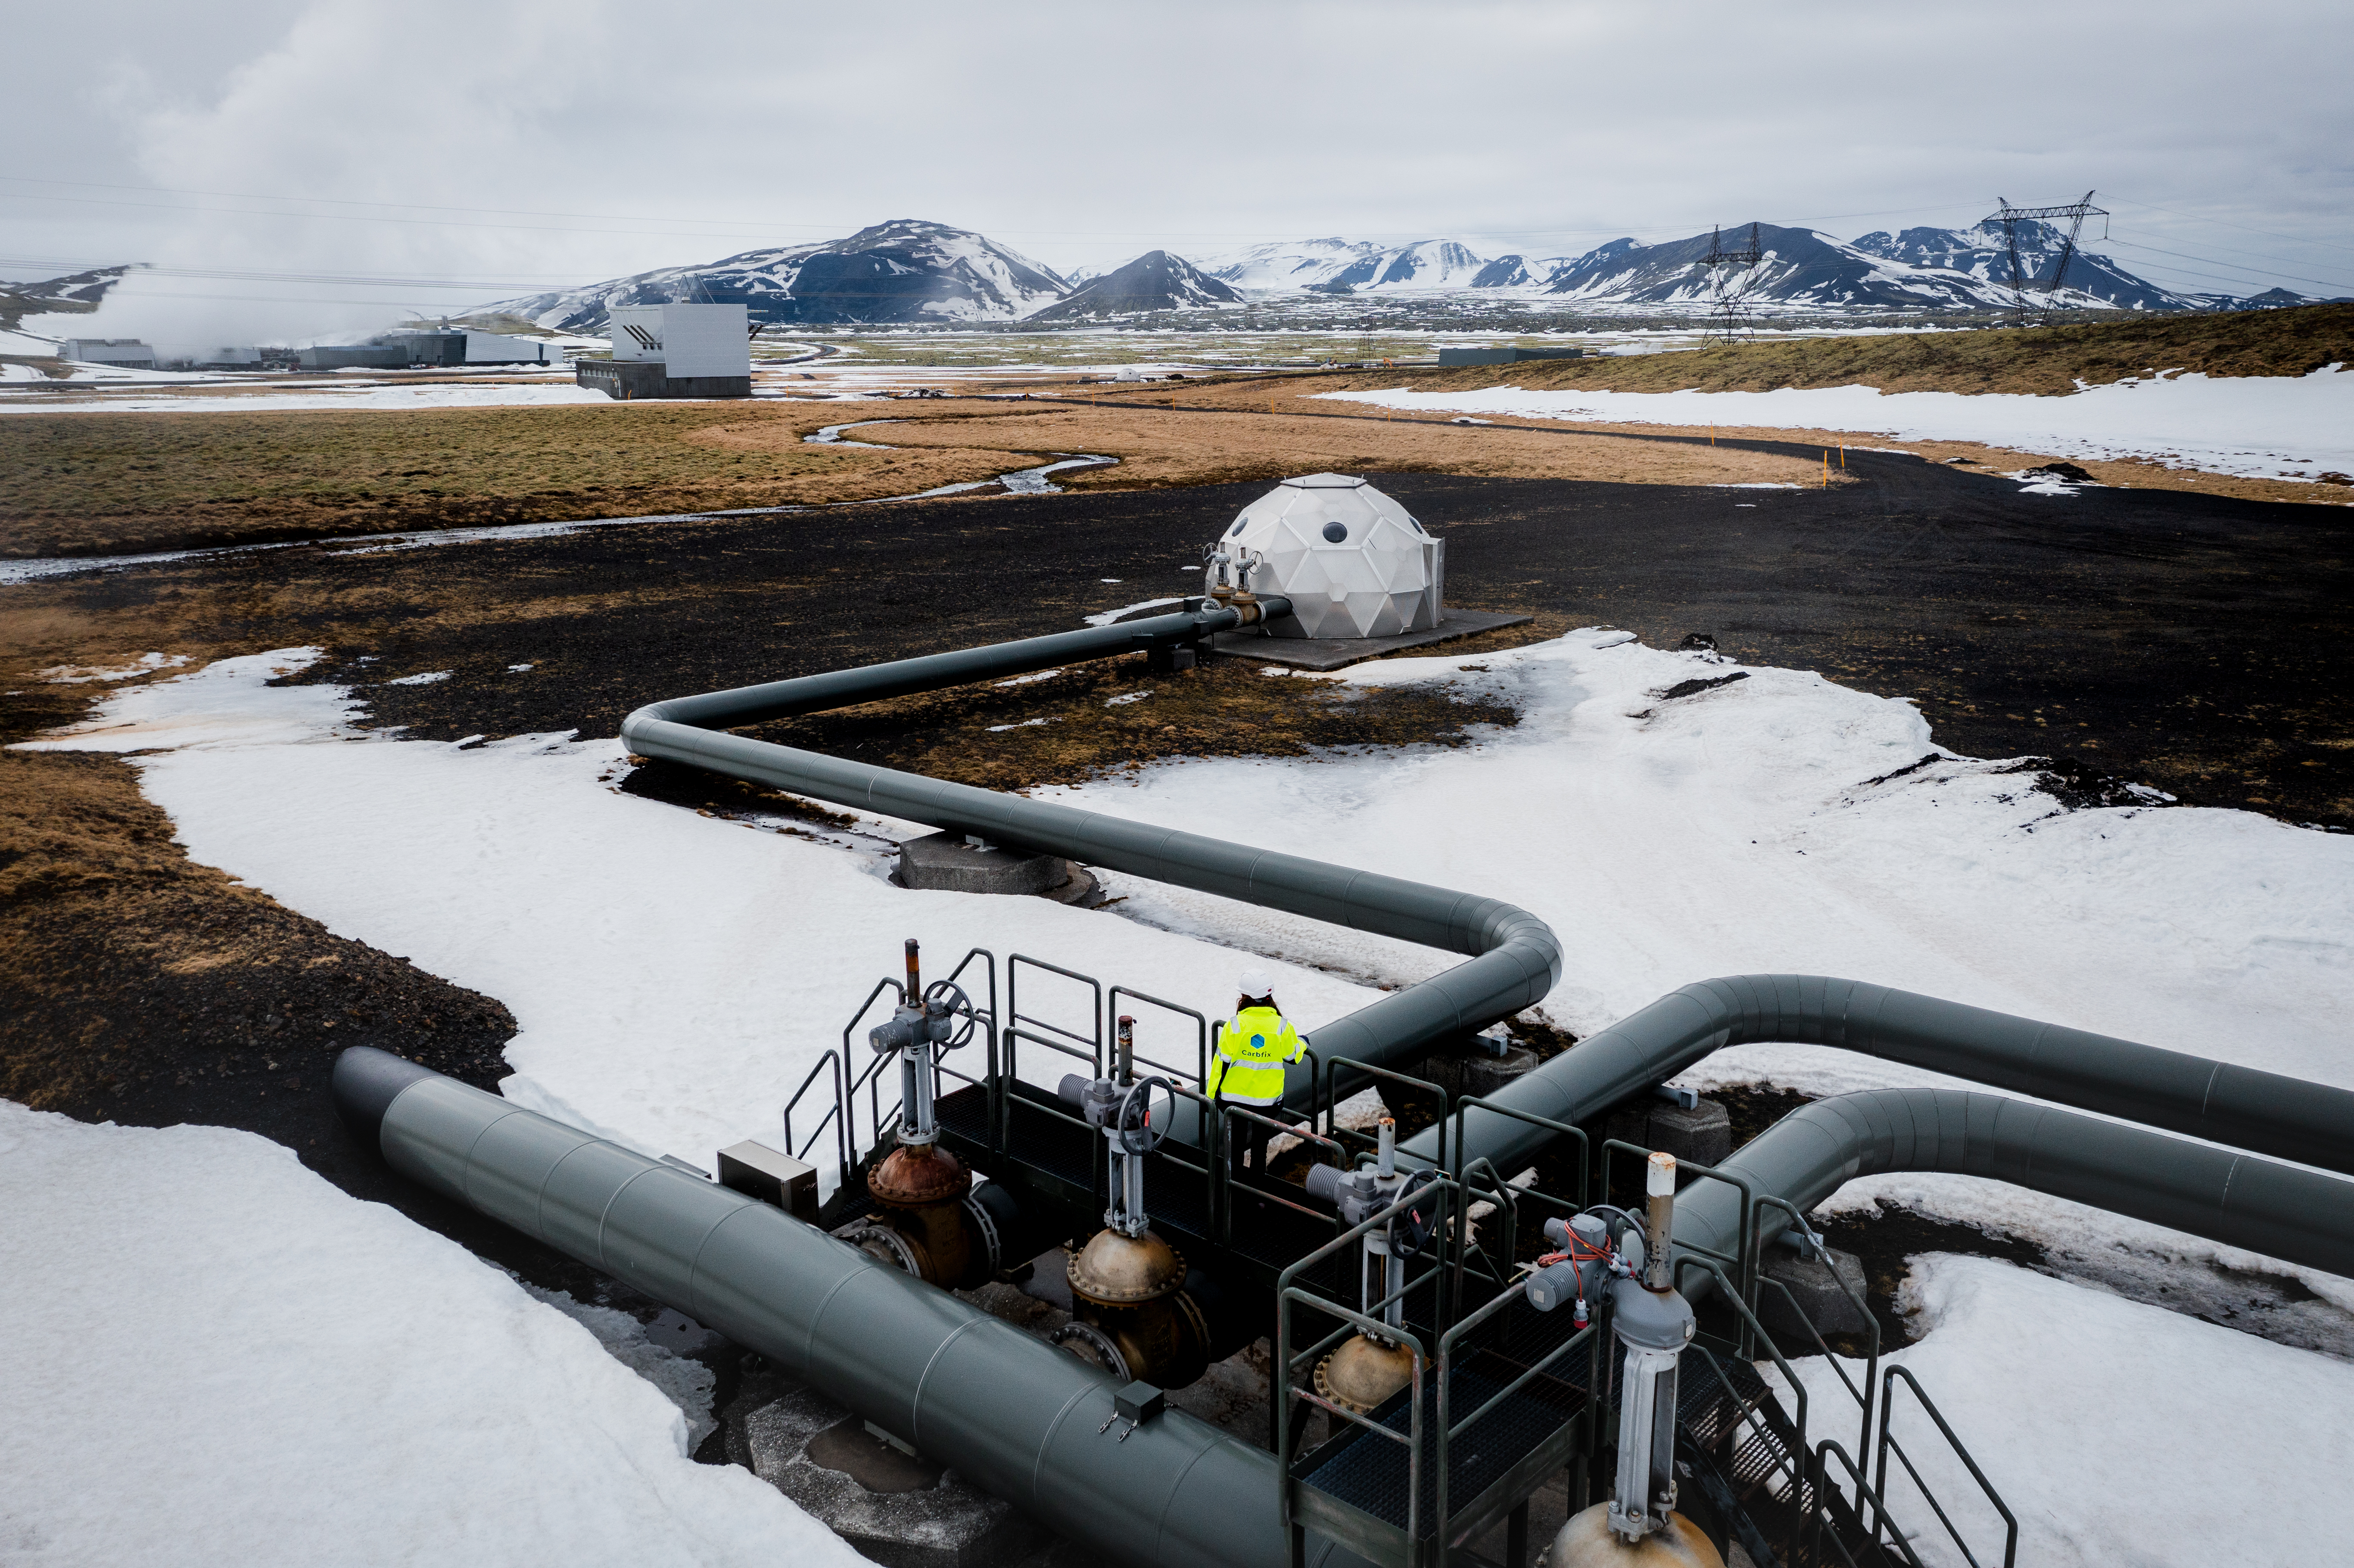 Pipes are running through a rugged snowy Icelandic landscape